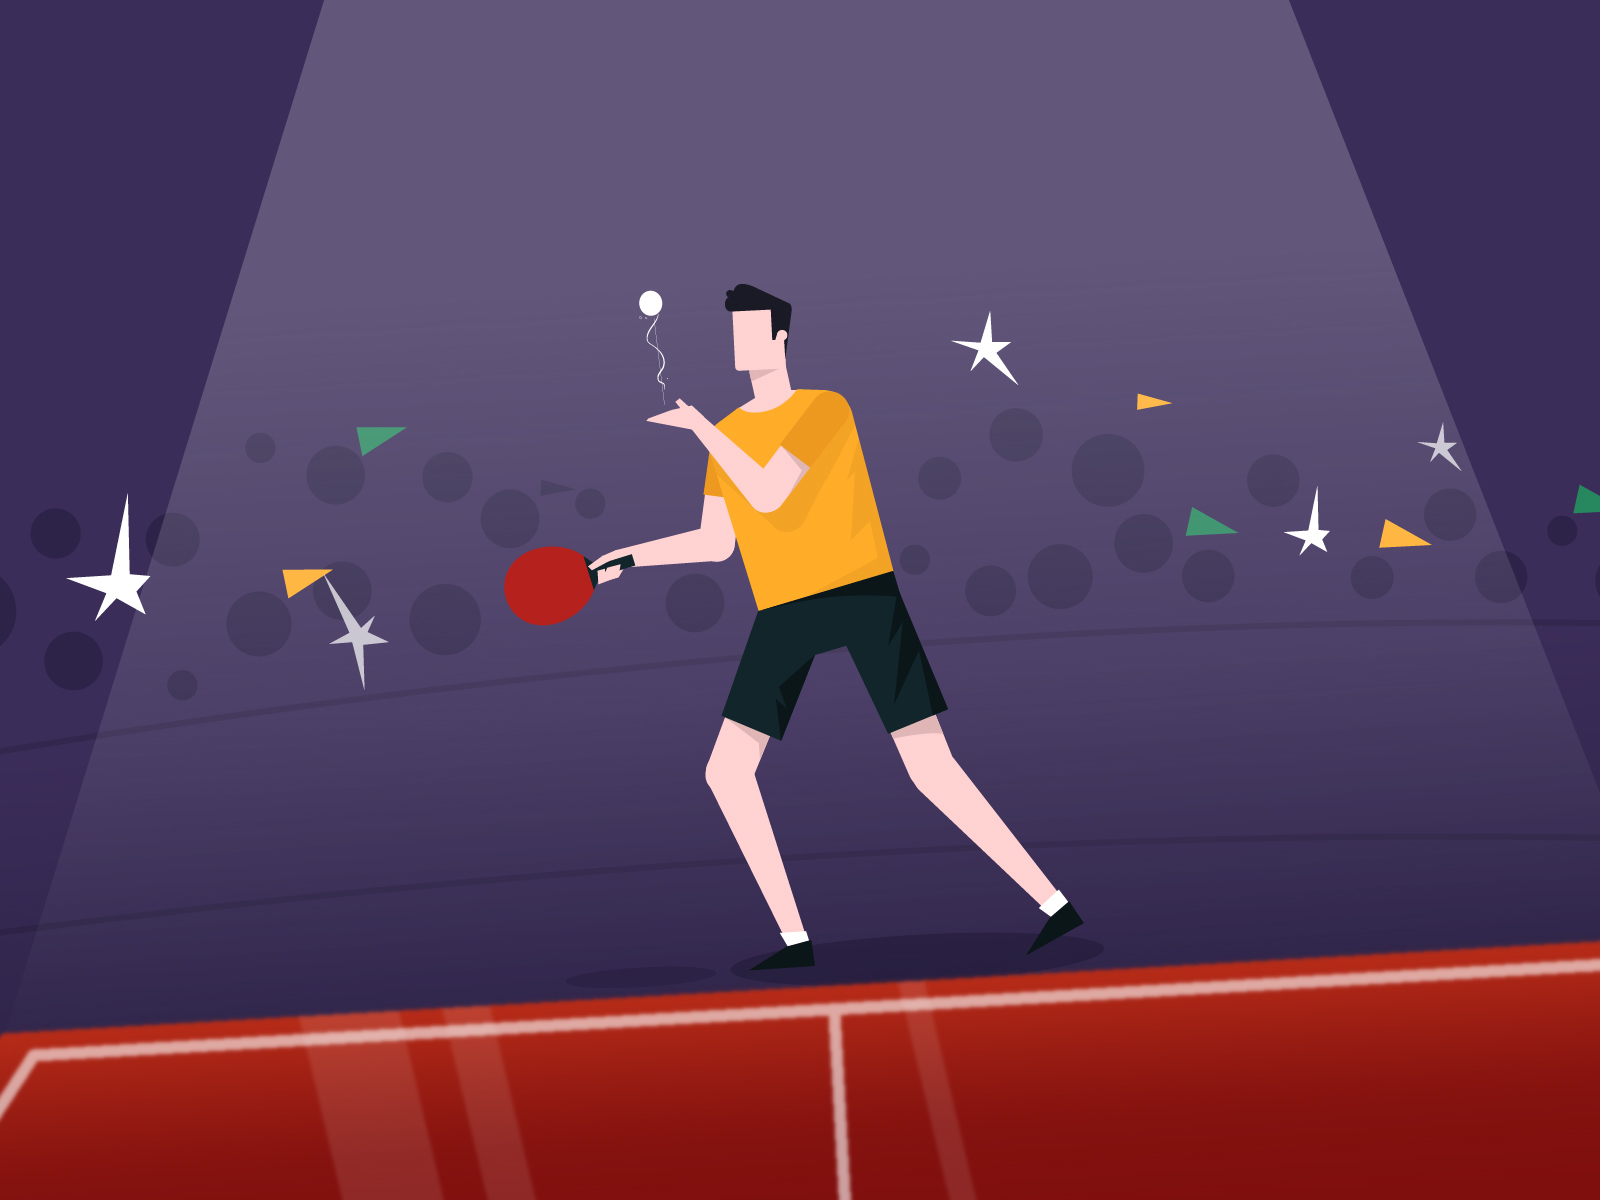 Keep Calm And Ping Pong By Sourav Sarkar On Dribbble